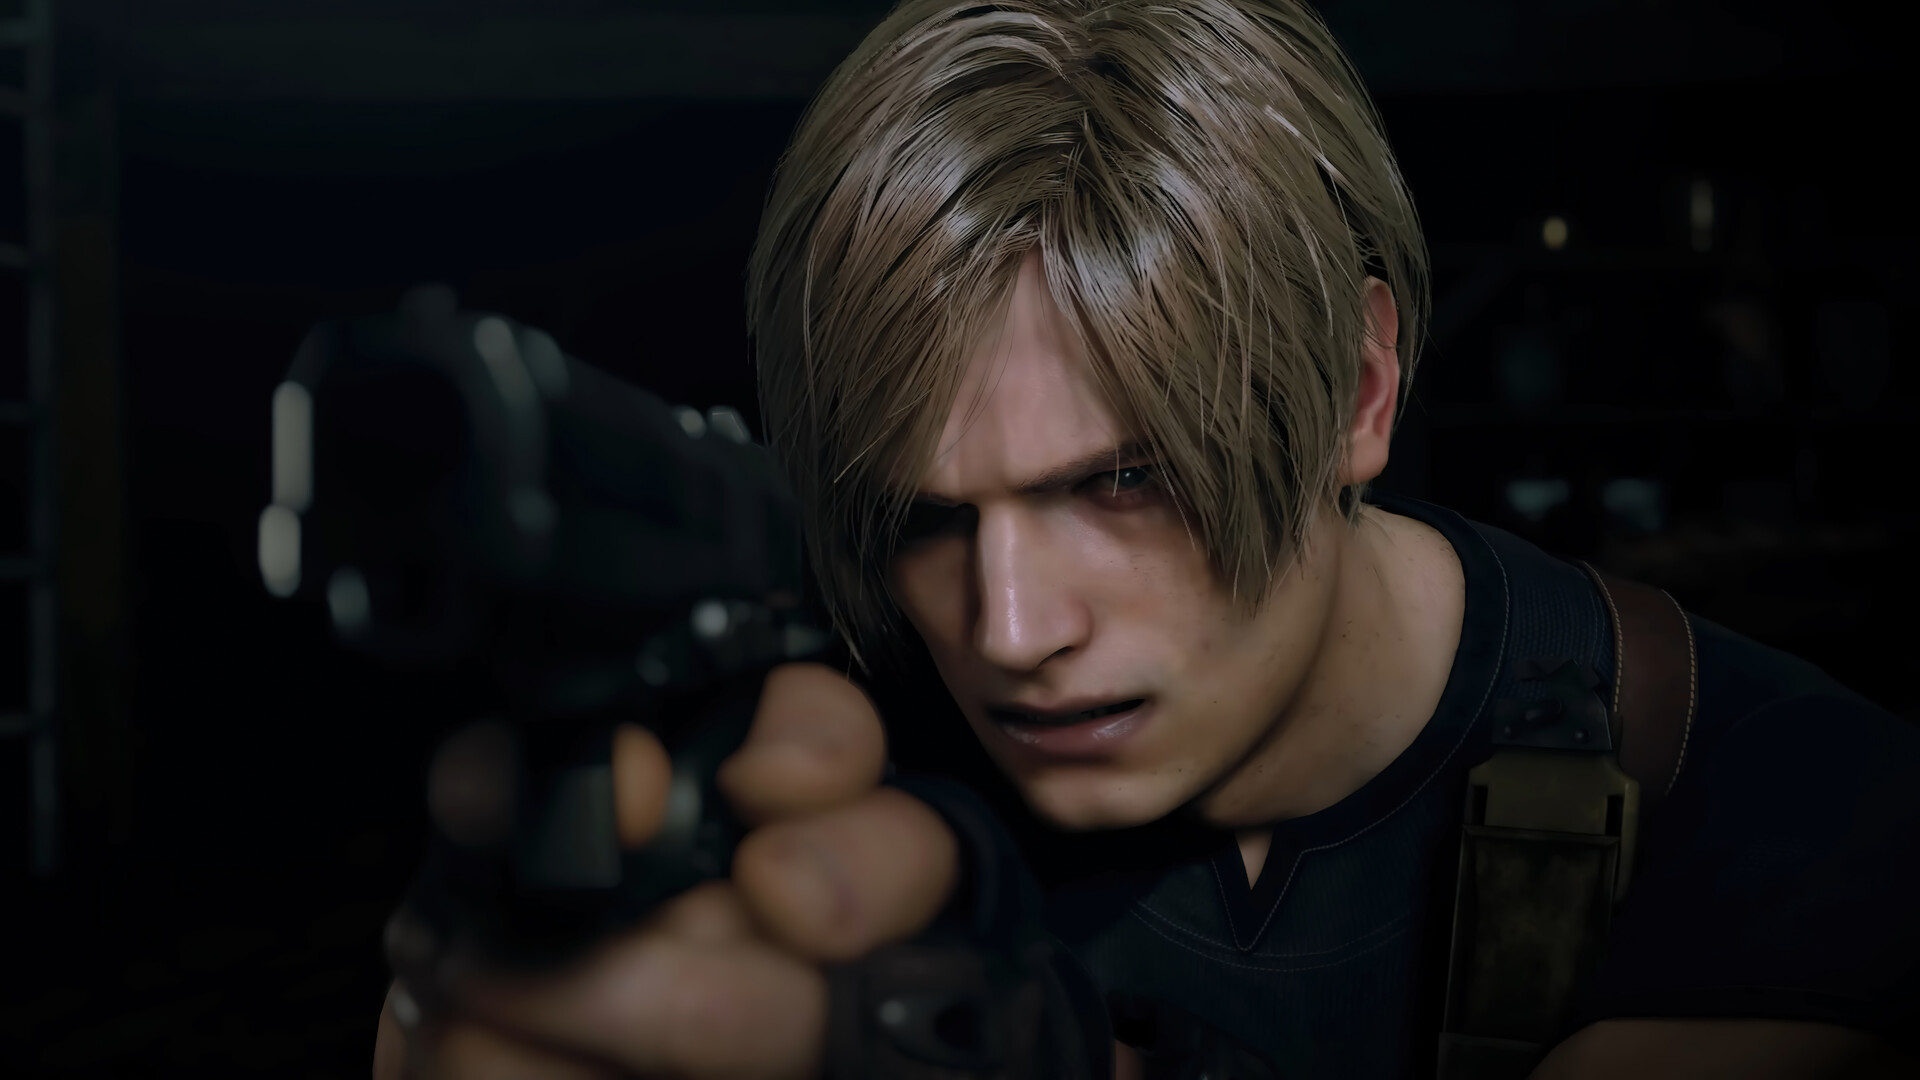 Resident Evil 4 PSN top download in March